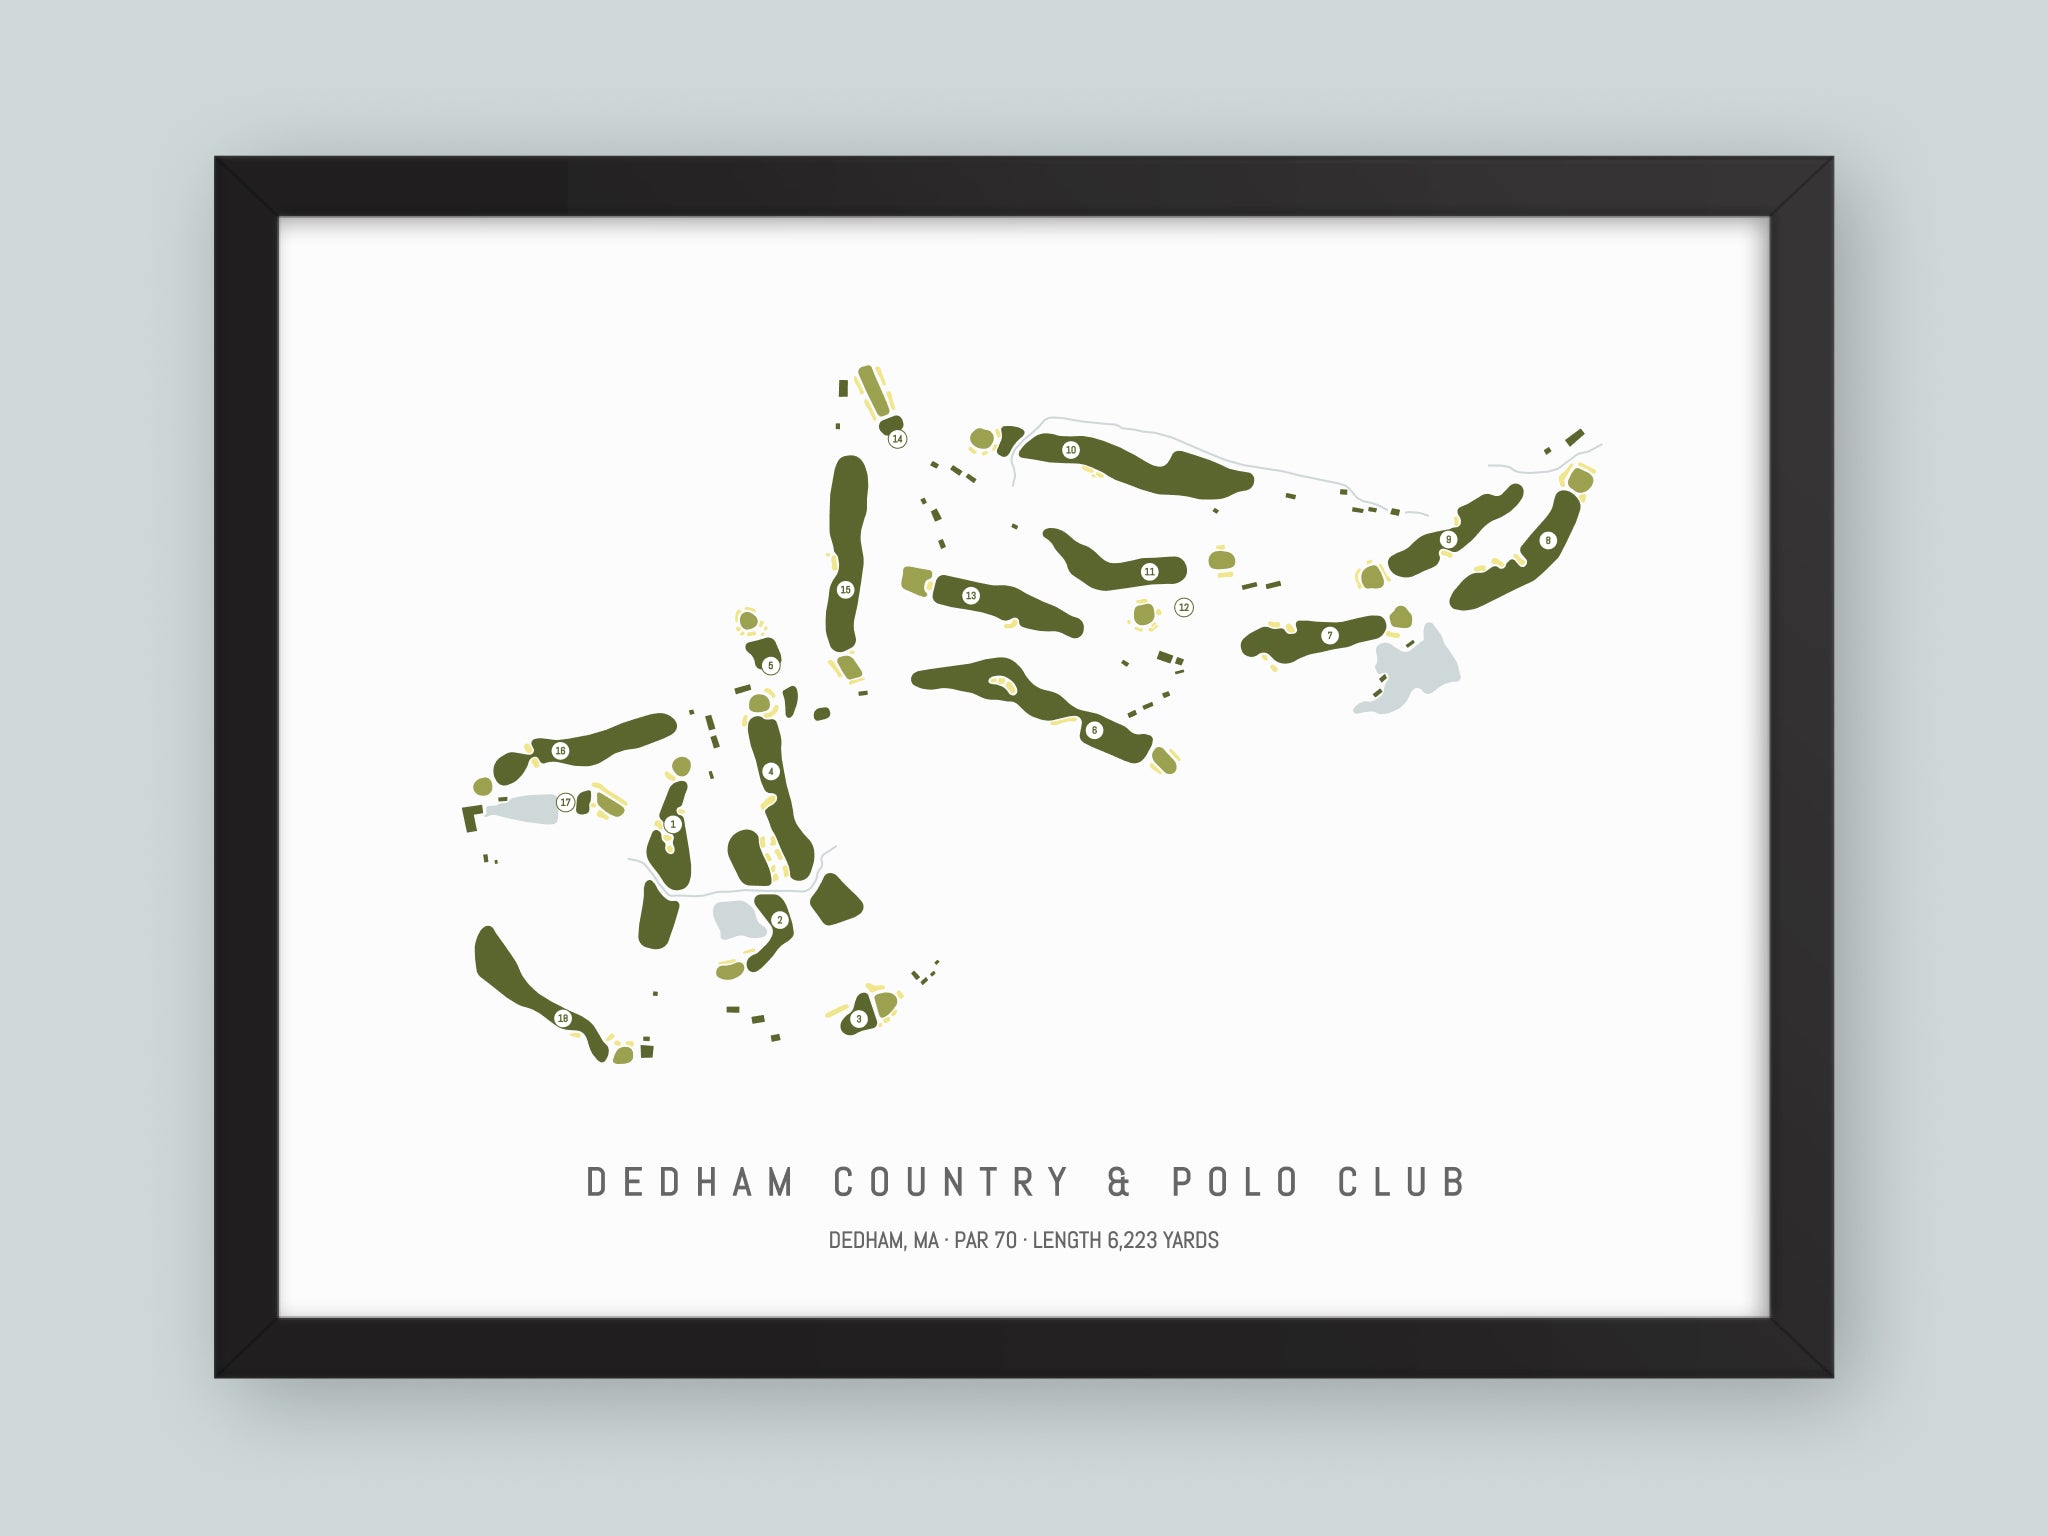 Dedham-Country-And-Polo-Club-MA--Black-Frame-24x18-With-Hole-Numbers